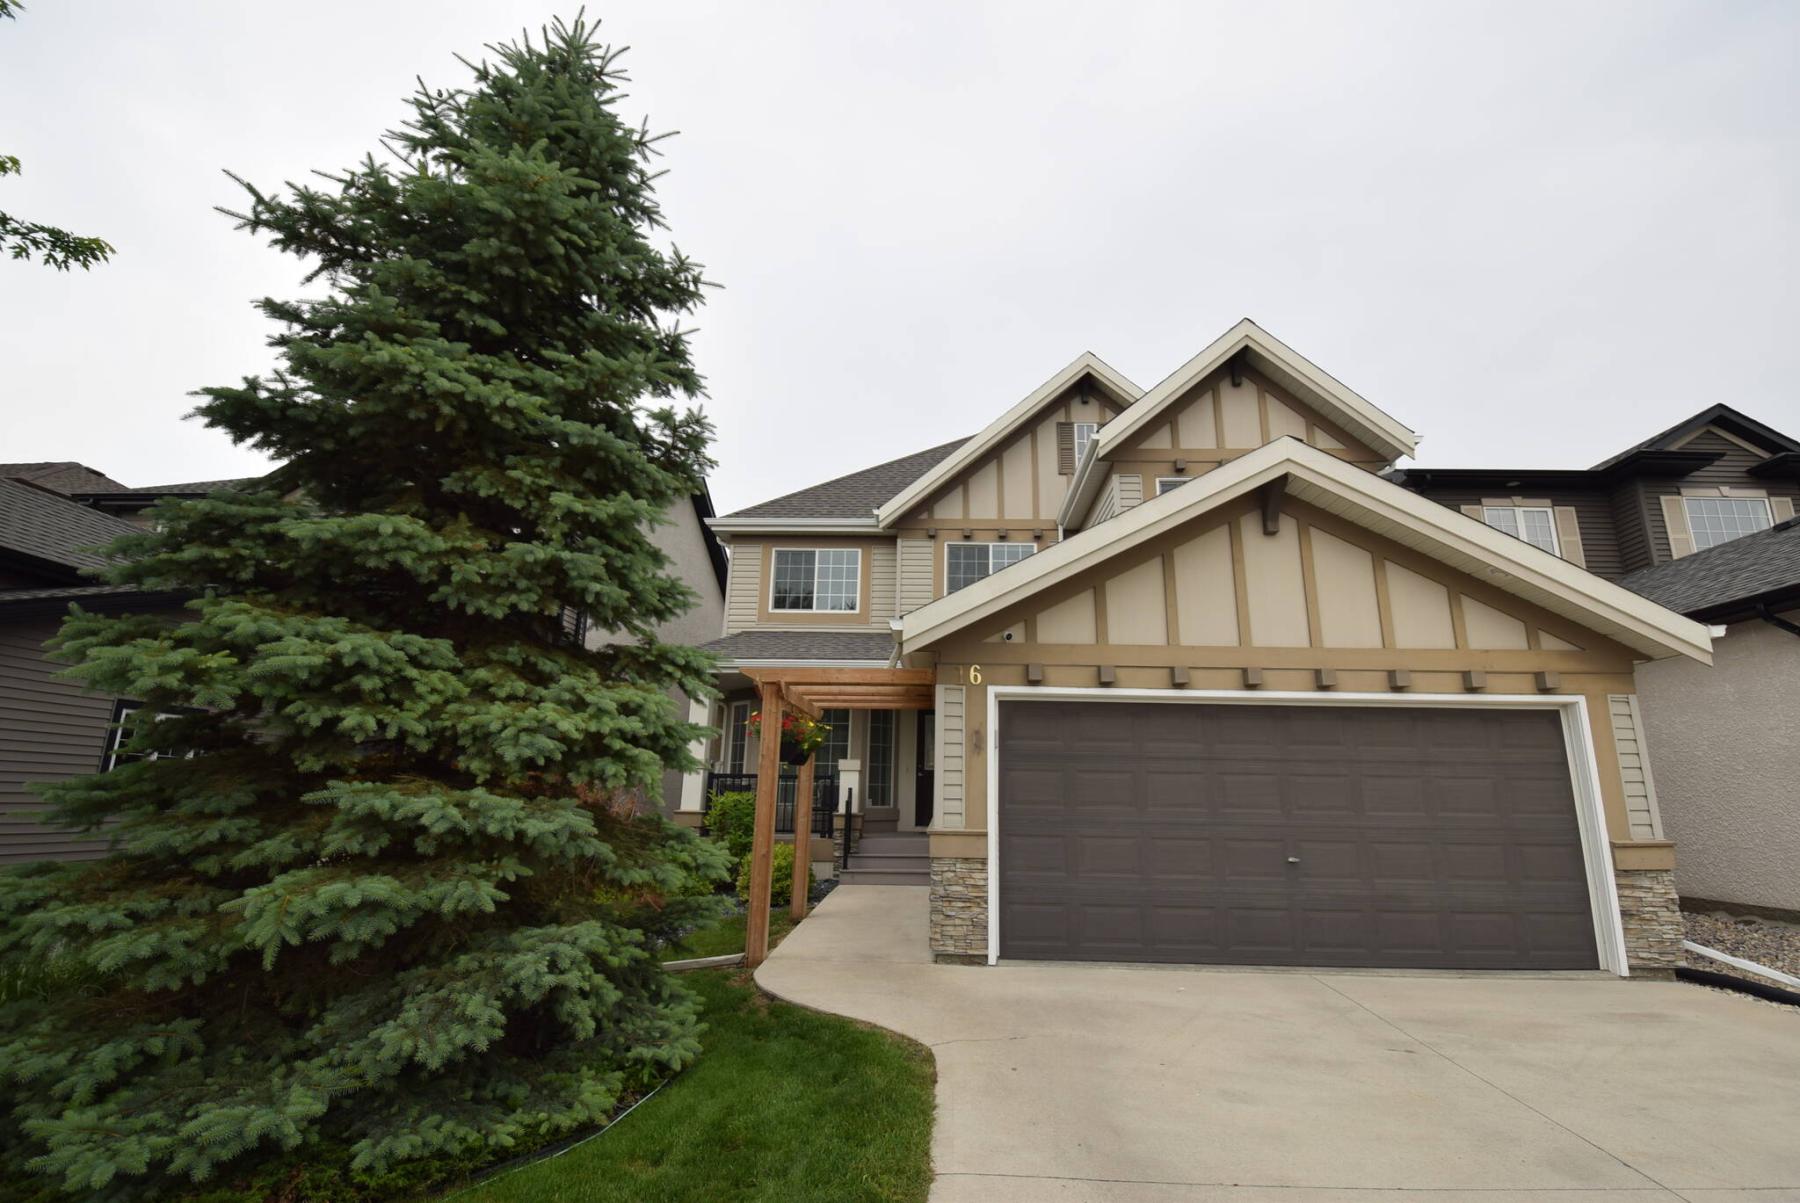  <p>Photos by Todd Lewys / Winnipeg Free Press</p>
                                <p>This two-storey home, which was a gold award winning show home in 2011, is in like-new condition, and filled with a host of gorgeous upgrades.</p> 